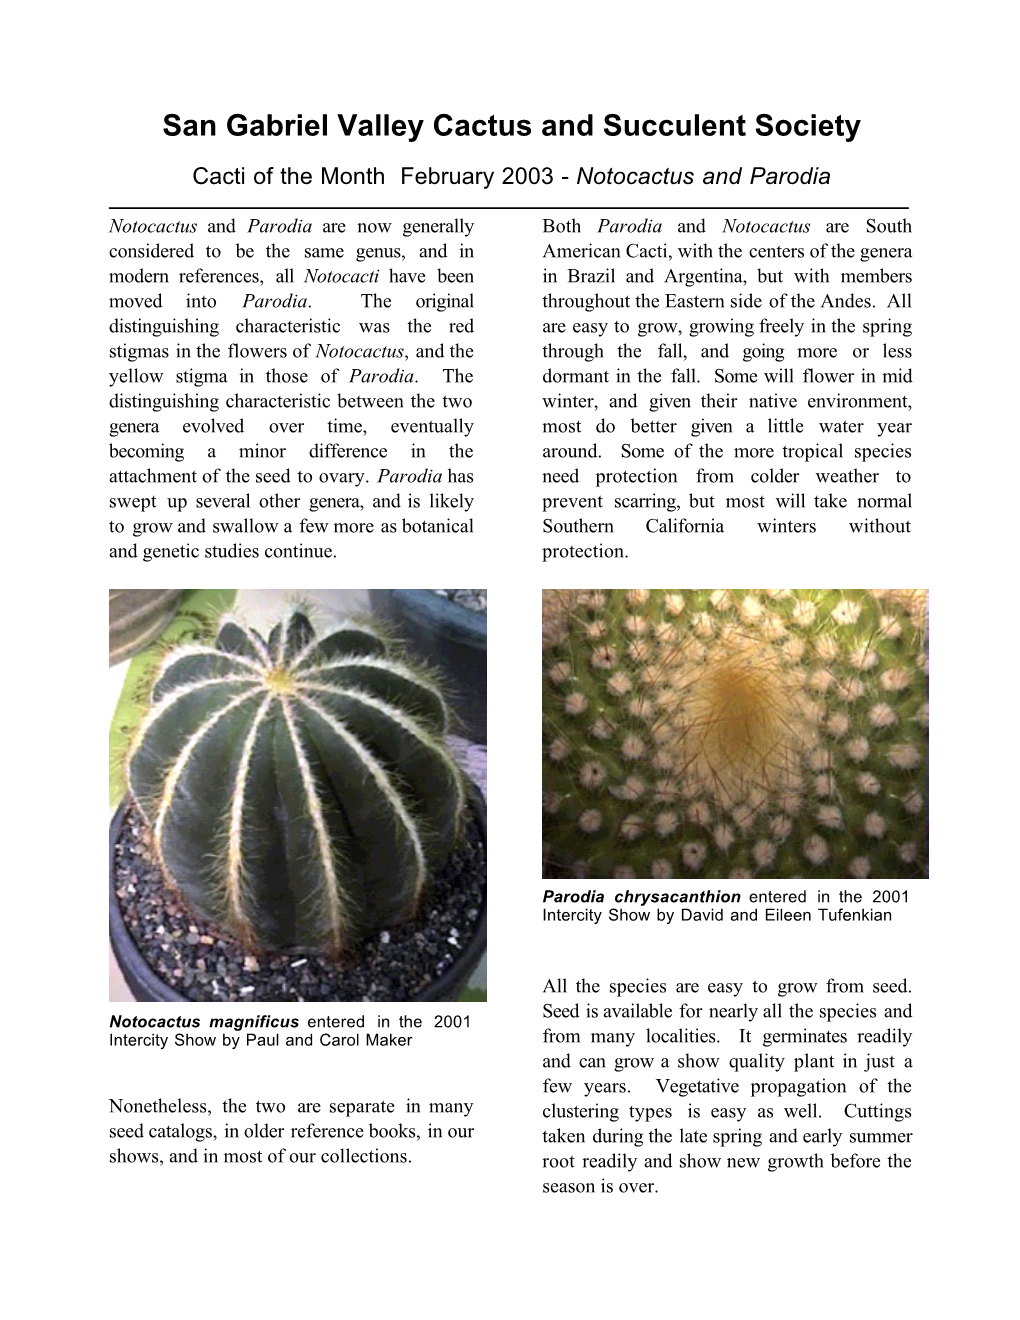 Cactus of the Month